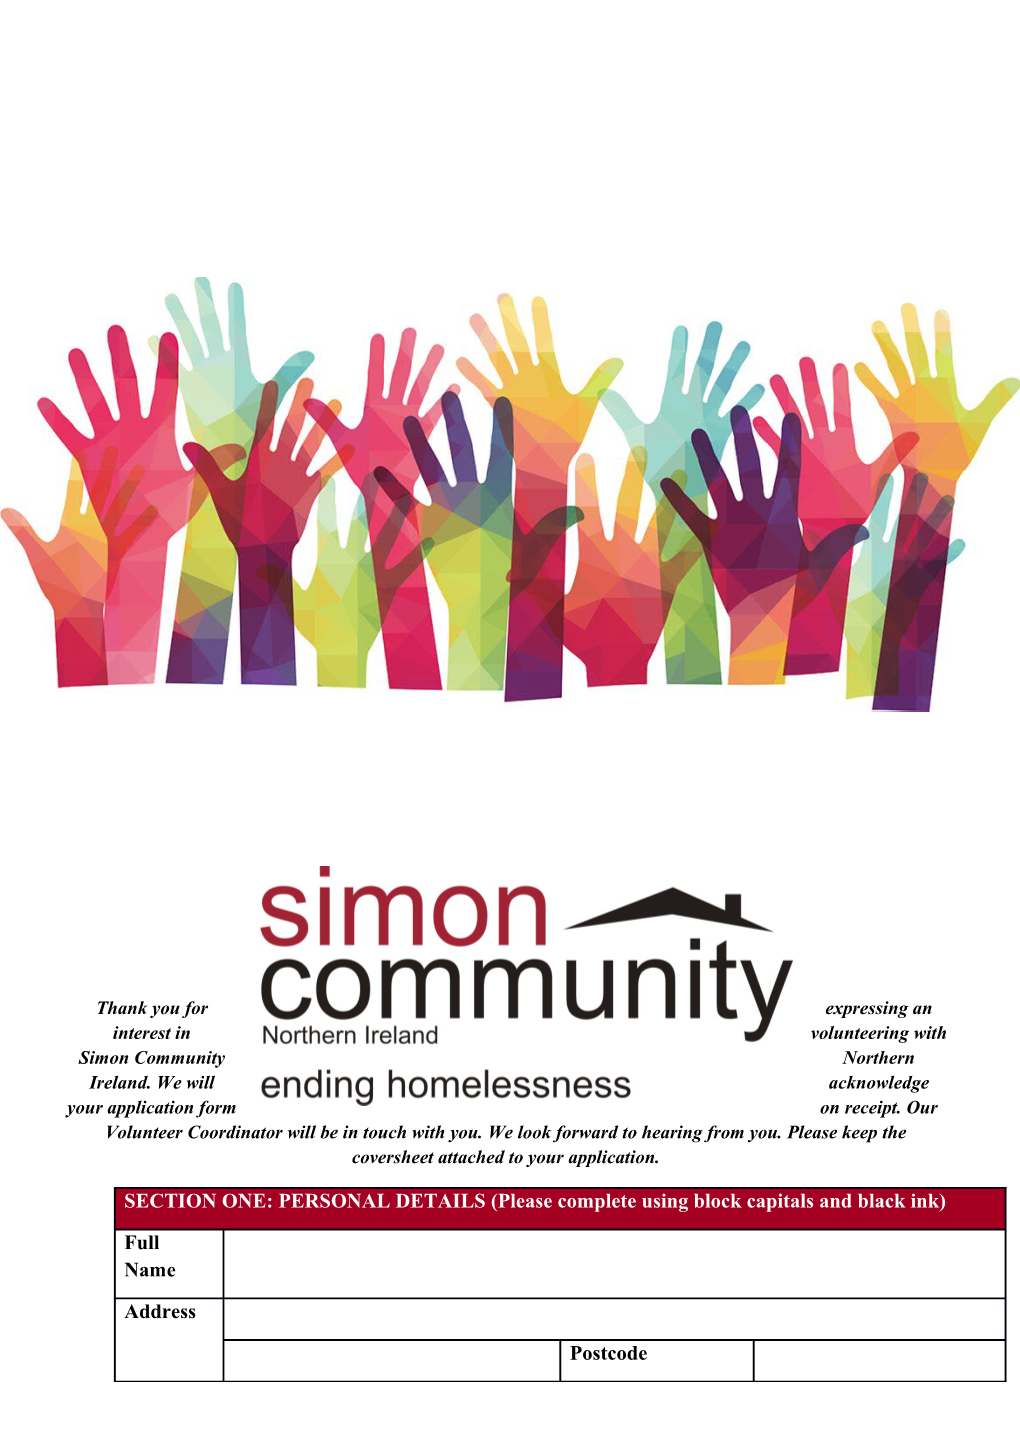 Thank You for Expressing an Interest in Volunteering with Simon Community Northern Ireland